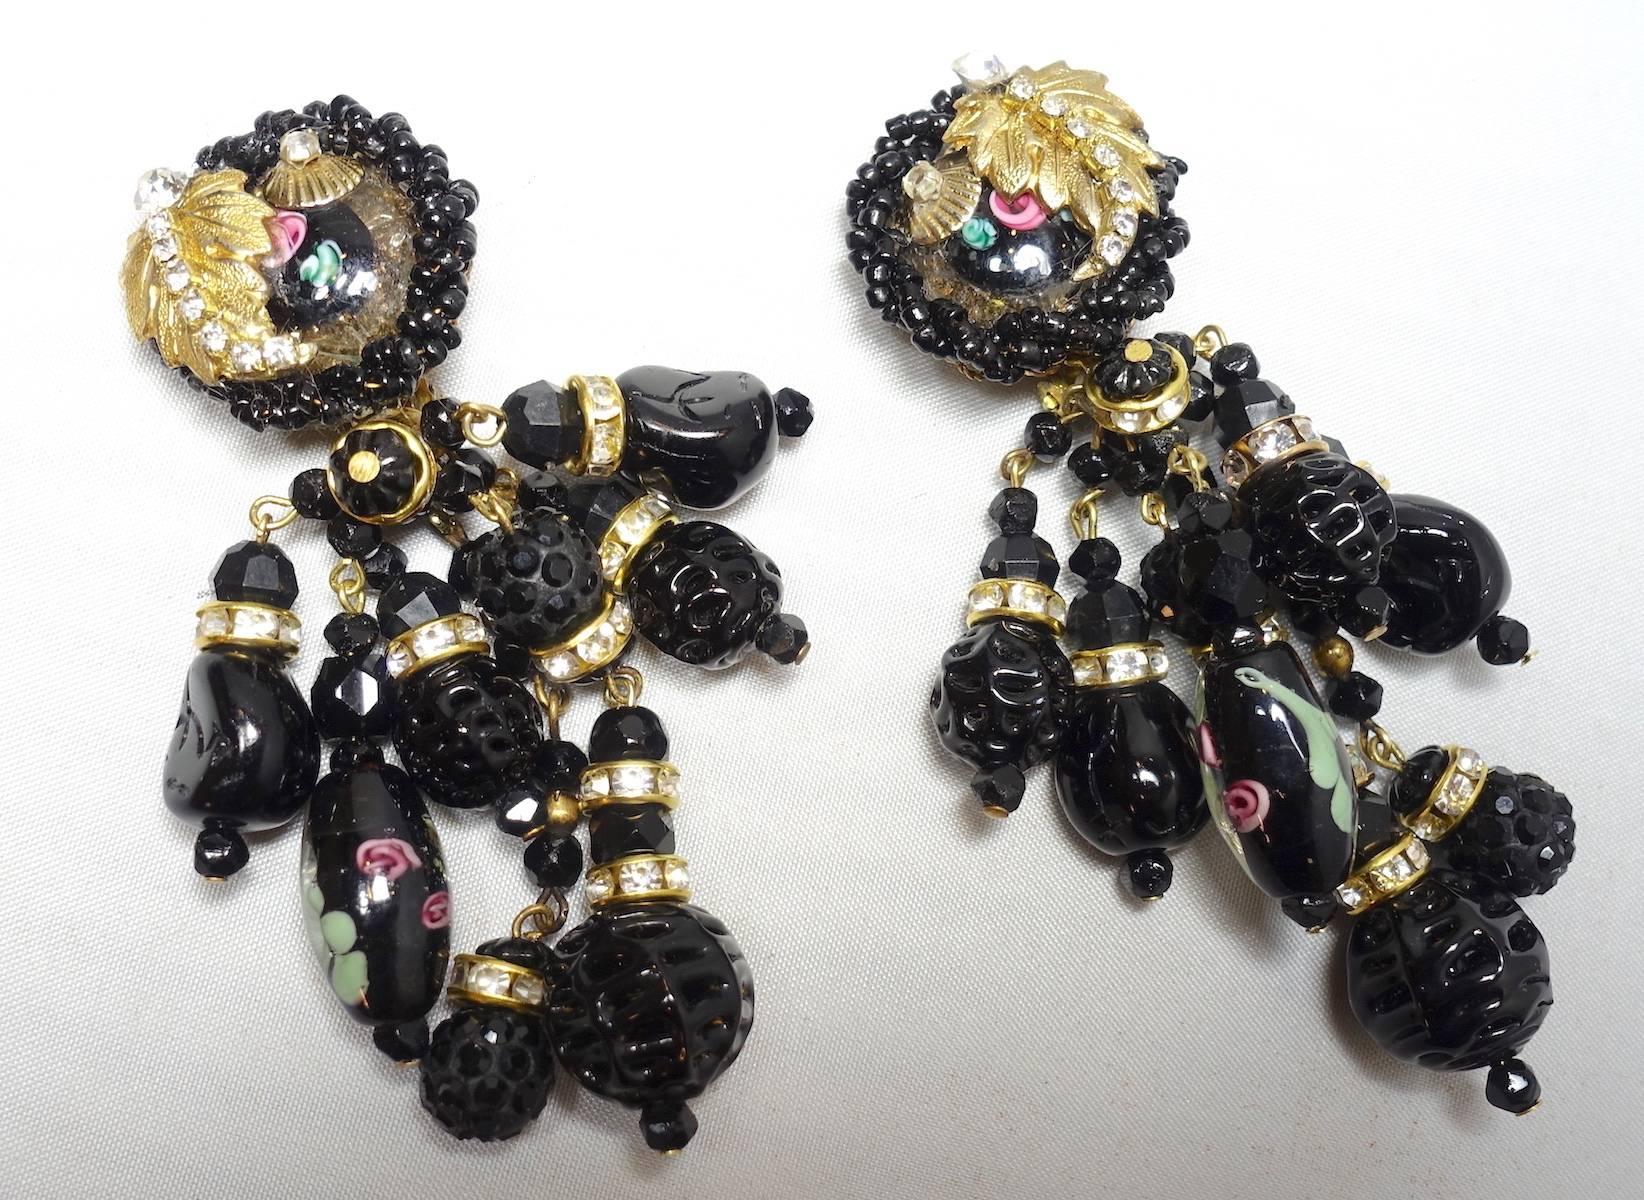 These vintage signed DeMario earrings feature Murano style molded glass beads with a floral design, black beads and crystal rhondells in a gold tone setting.  These clip earrings measure 3-1/4” x 1-1/4” and are signed “DeMario”.  They are in